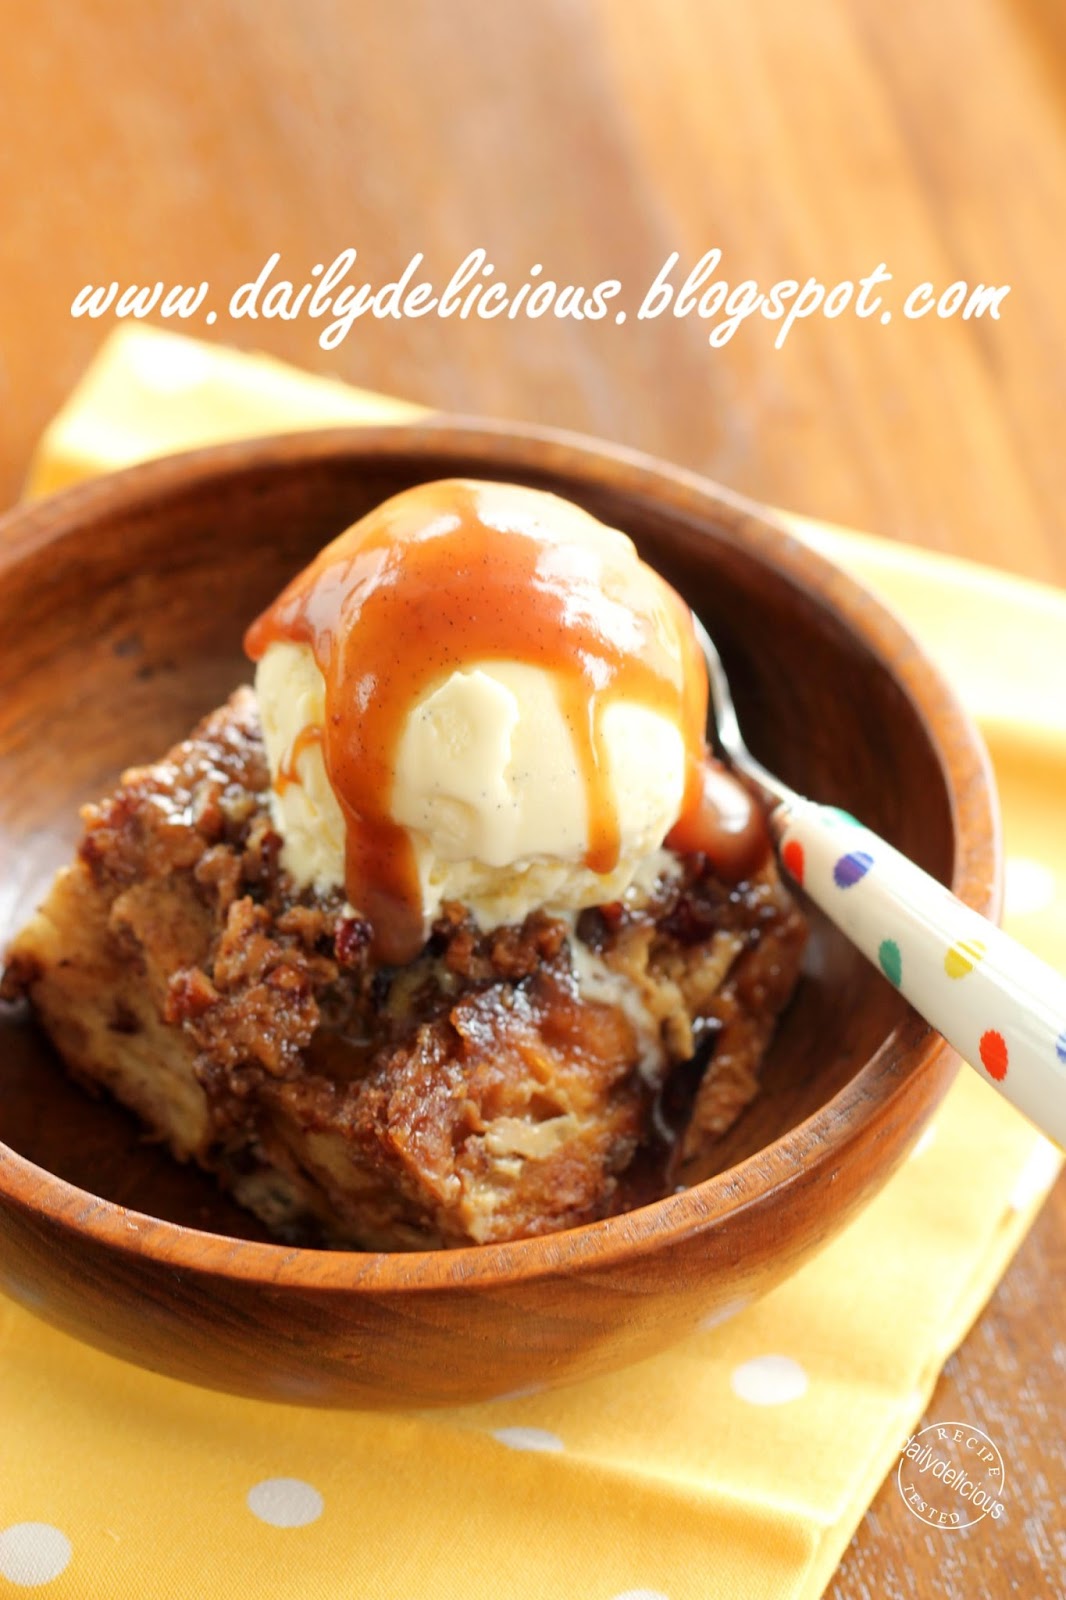 dailydelicious: Happy Cooking with LG SolarDom: Caramel Pecan Bread Pudding